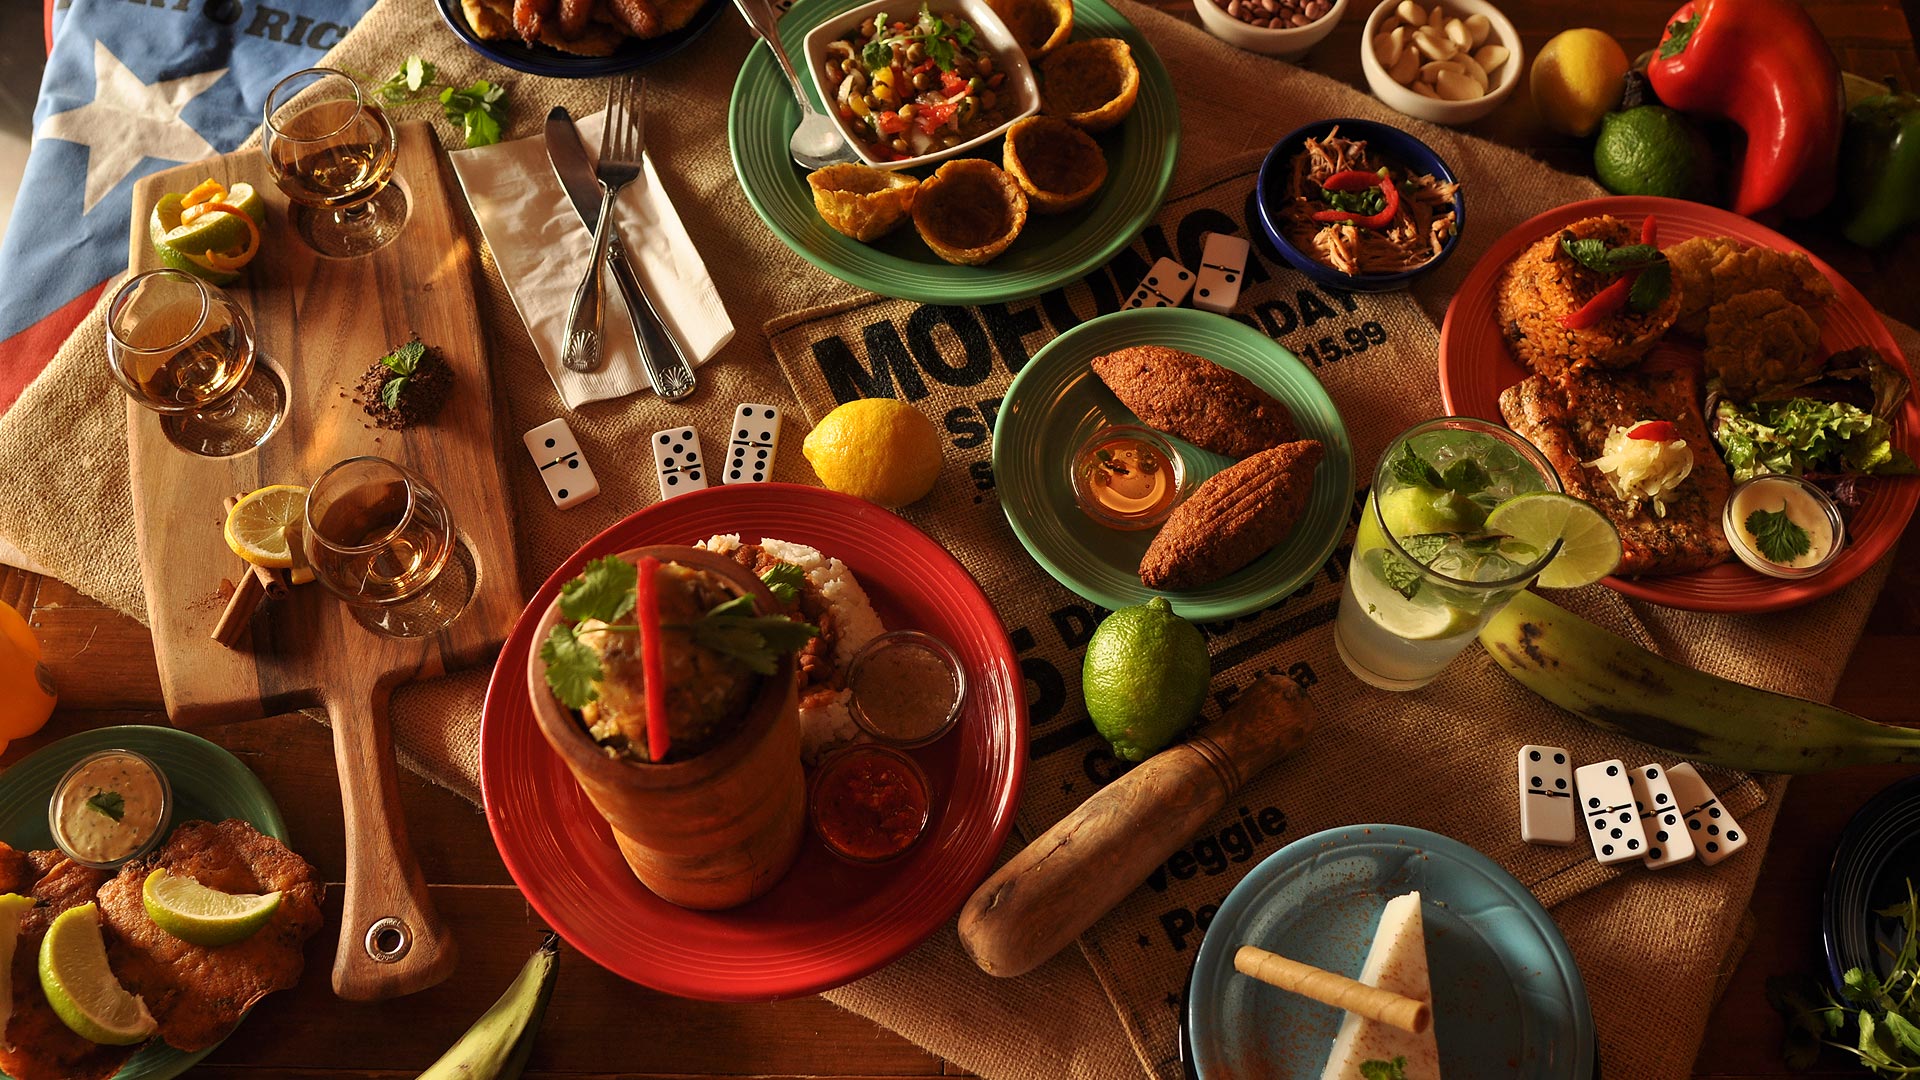 A bird’s eye view showing a canvas-covered table with a variety of colorful plates, food, and cocktails.